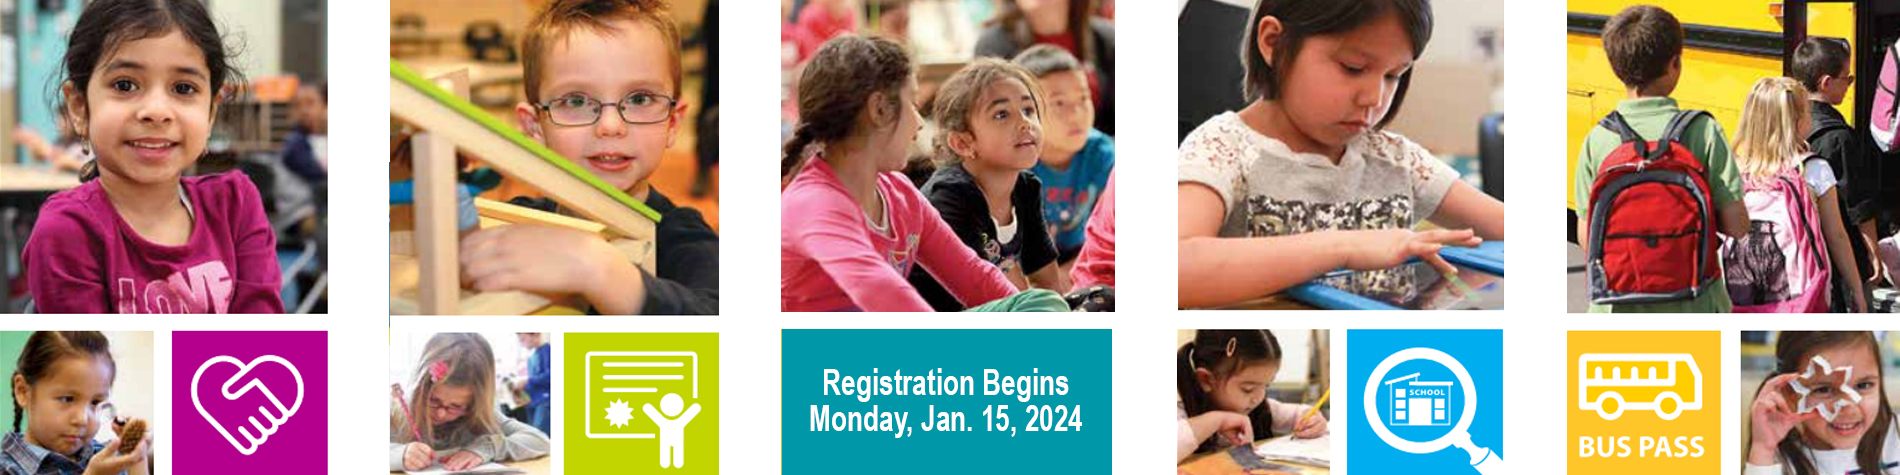 <p class="slider-title">Getting Ready for Kindergarten Registration</p><div class="banner-line"></div><p class="slider-subtitle">Starting Monday, Jan. 15, 2024, kindergarten registration will be open for the 2024-25 school year. </p> <a style="pointer-events:all" class=AEBannerMoreLink href="https://cbe.ab.ca/news-centre/Pages/getting-ready-for-kindergarten-registration.aspx">Read More</a>